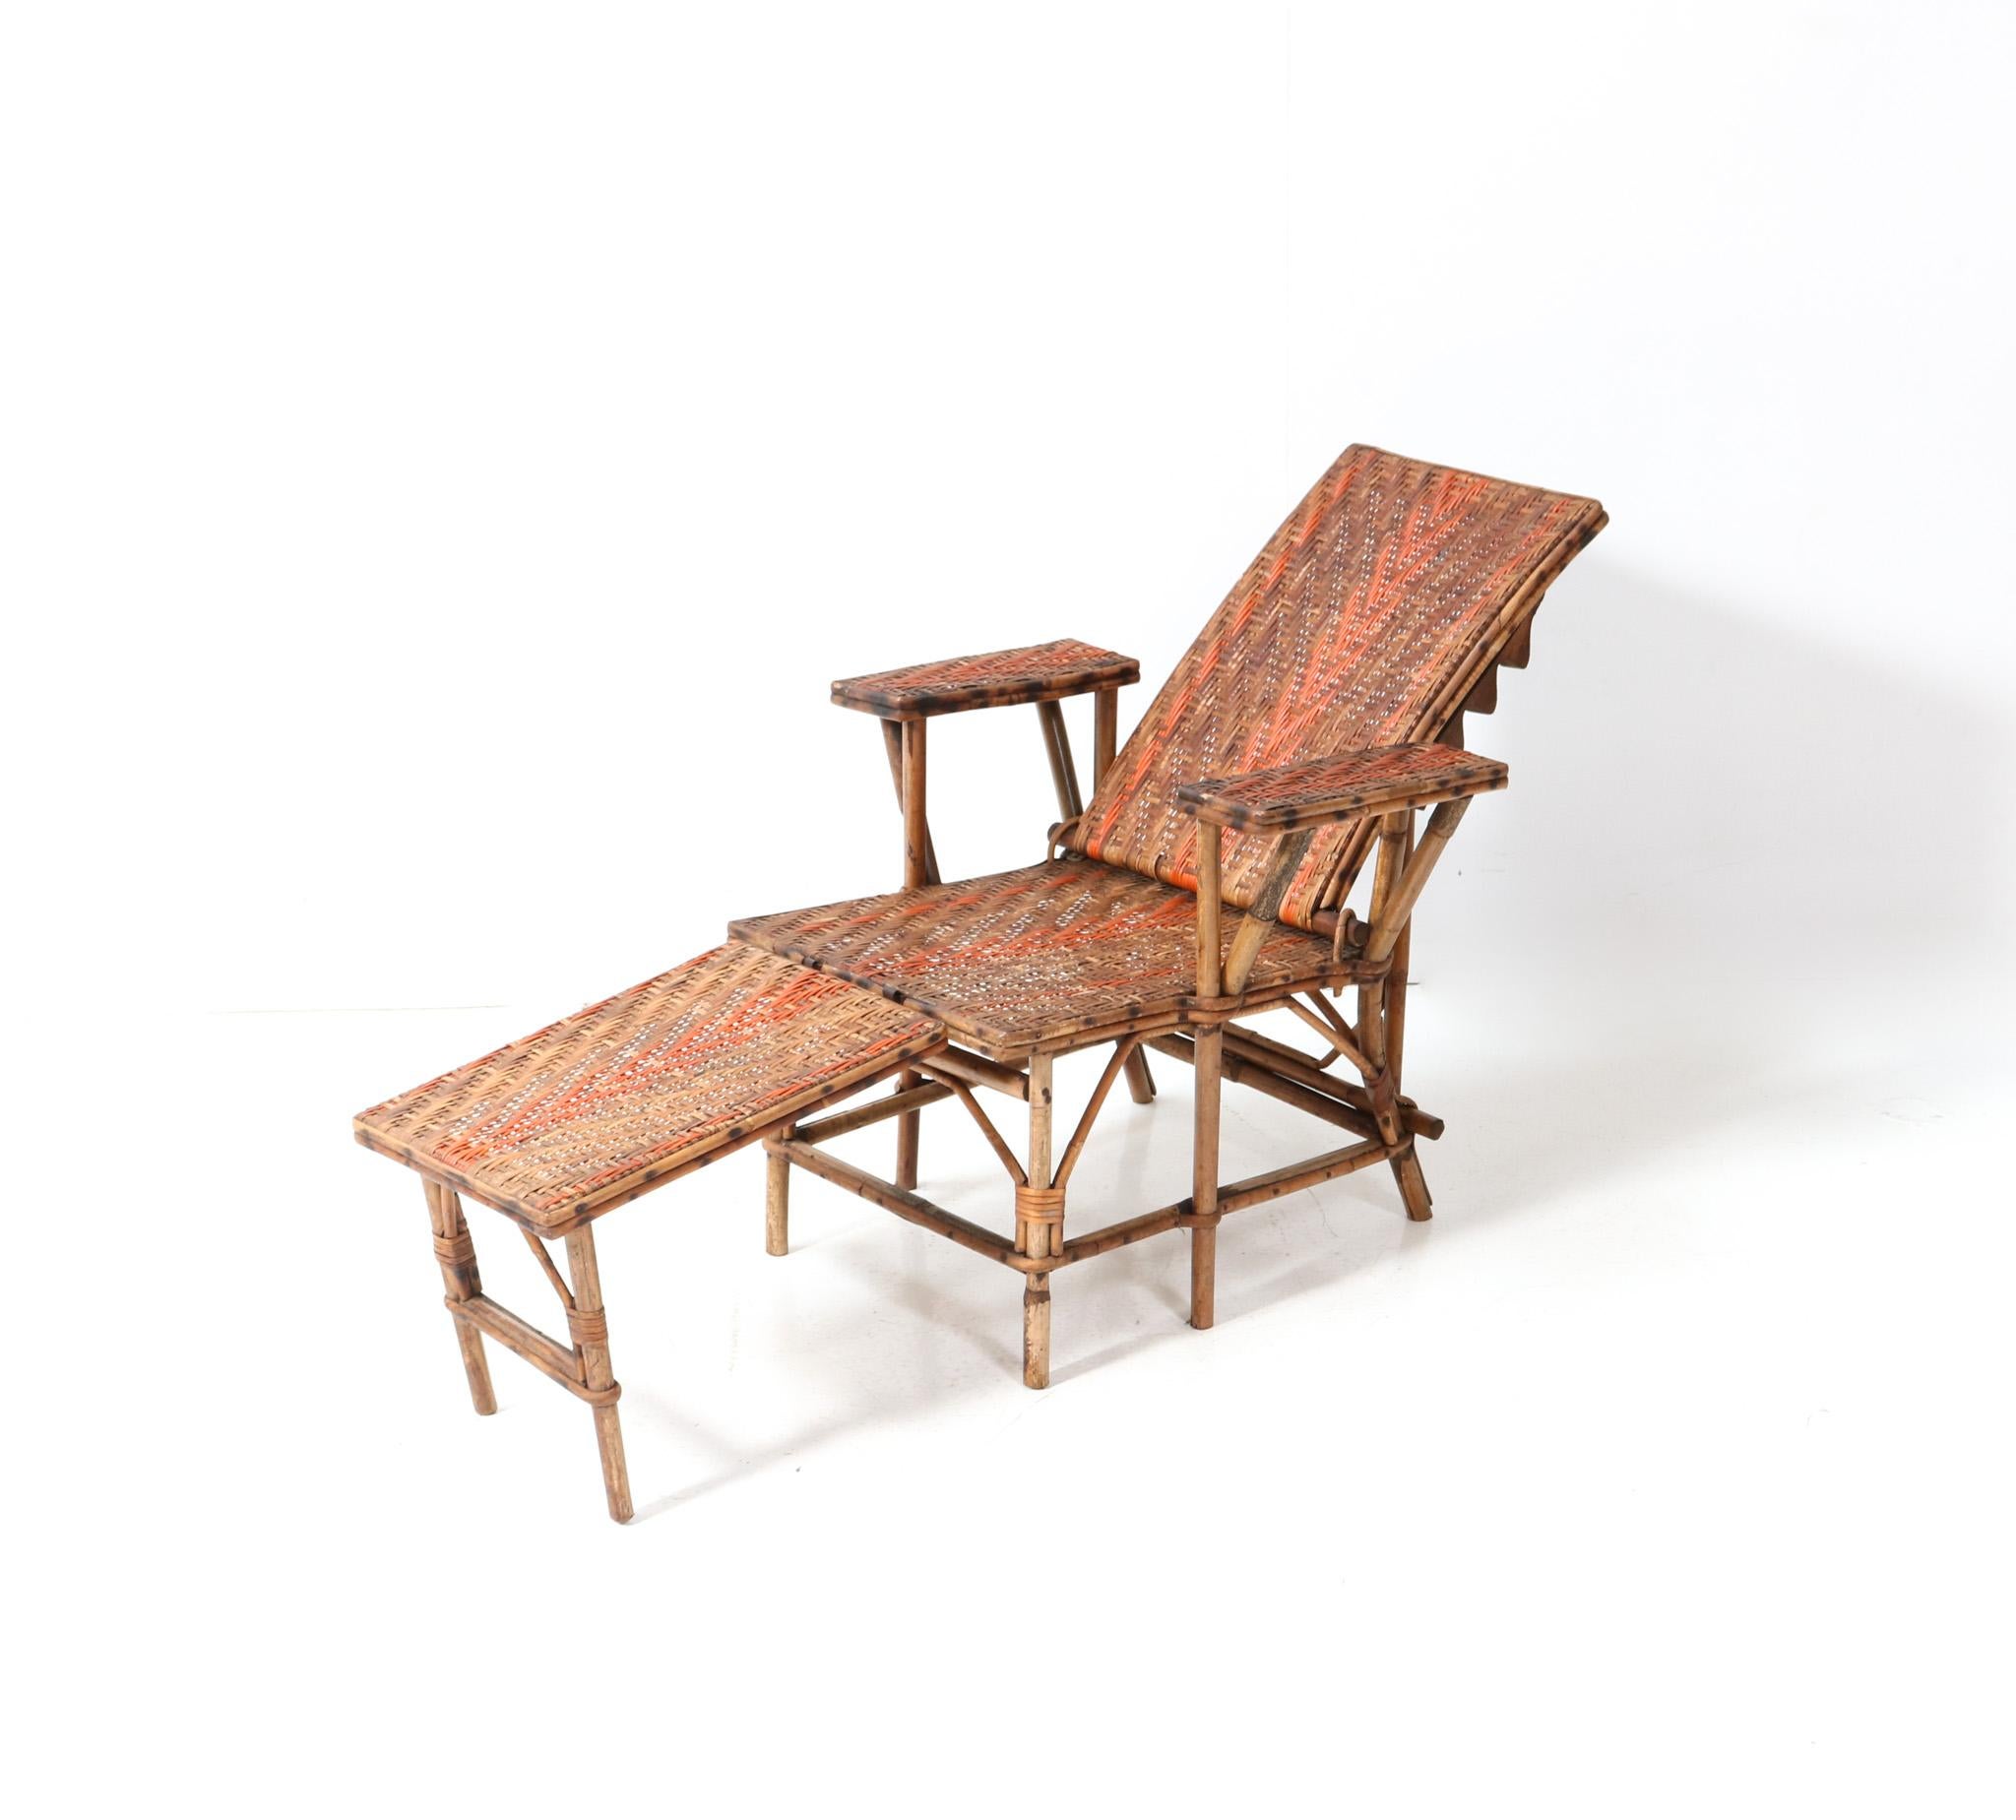 Stunning and rare Art Nouveau children's folding deck chair or lounge chair.
Striking French design from the 1900s.
Rattan and bamboo frame with original rattan and bamboo foot stool.
Measurements foot stool: H: 33 cm or 12.99 in x W: 40 cm or